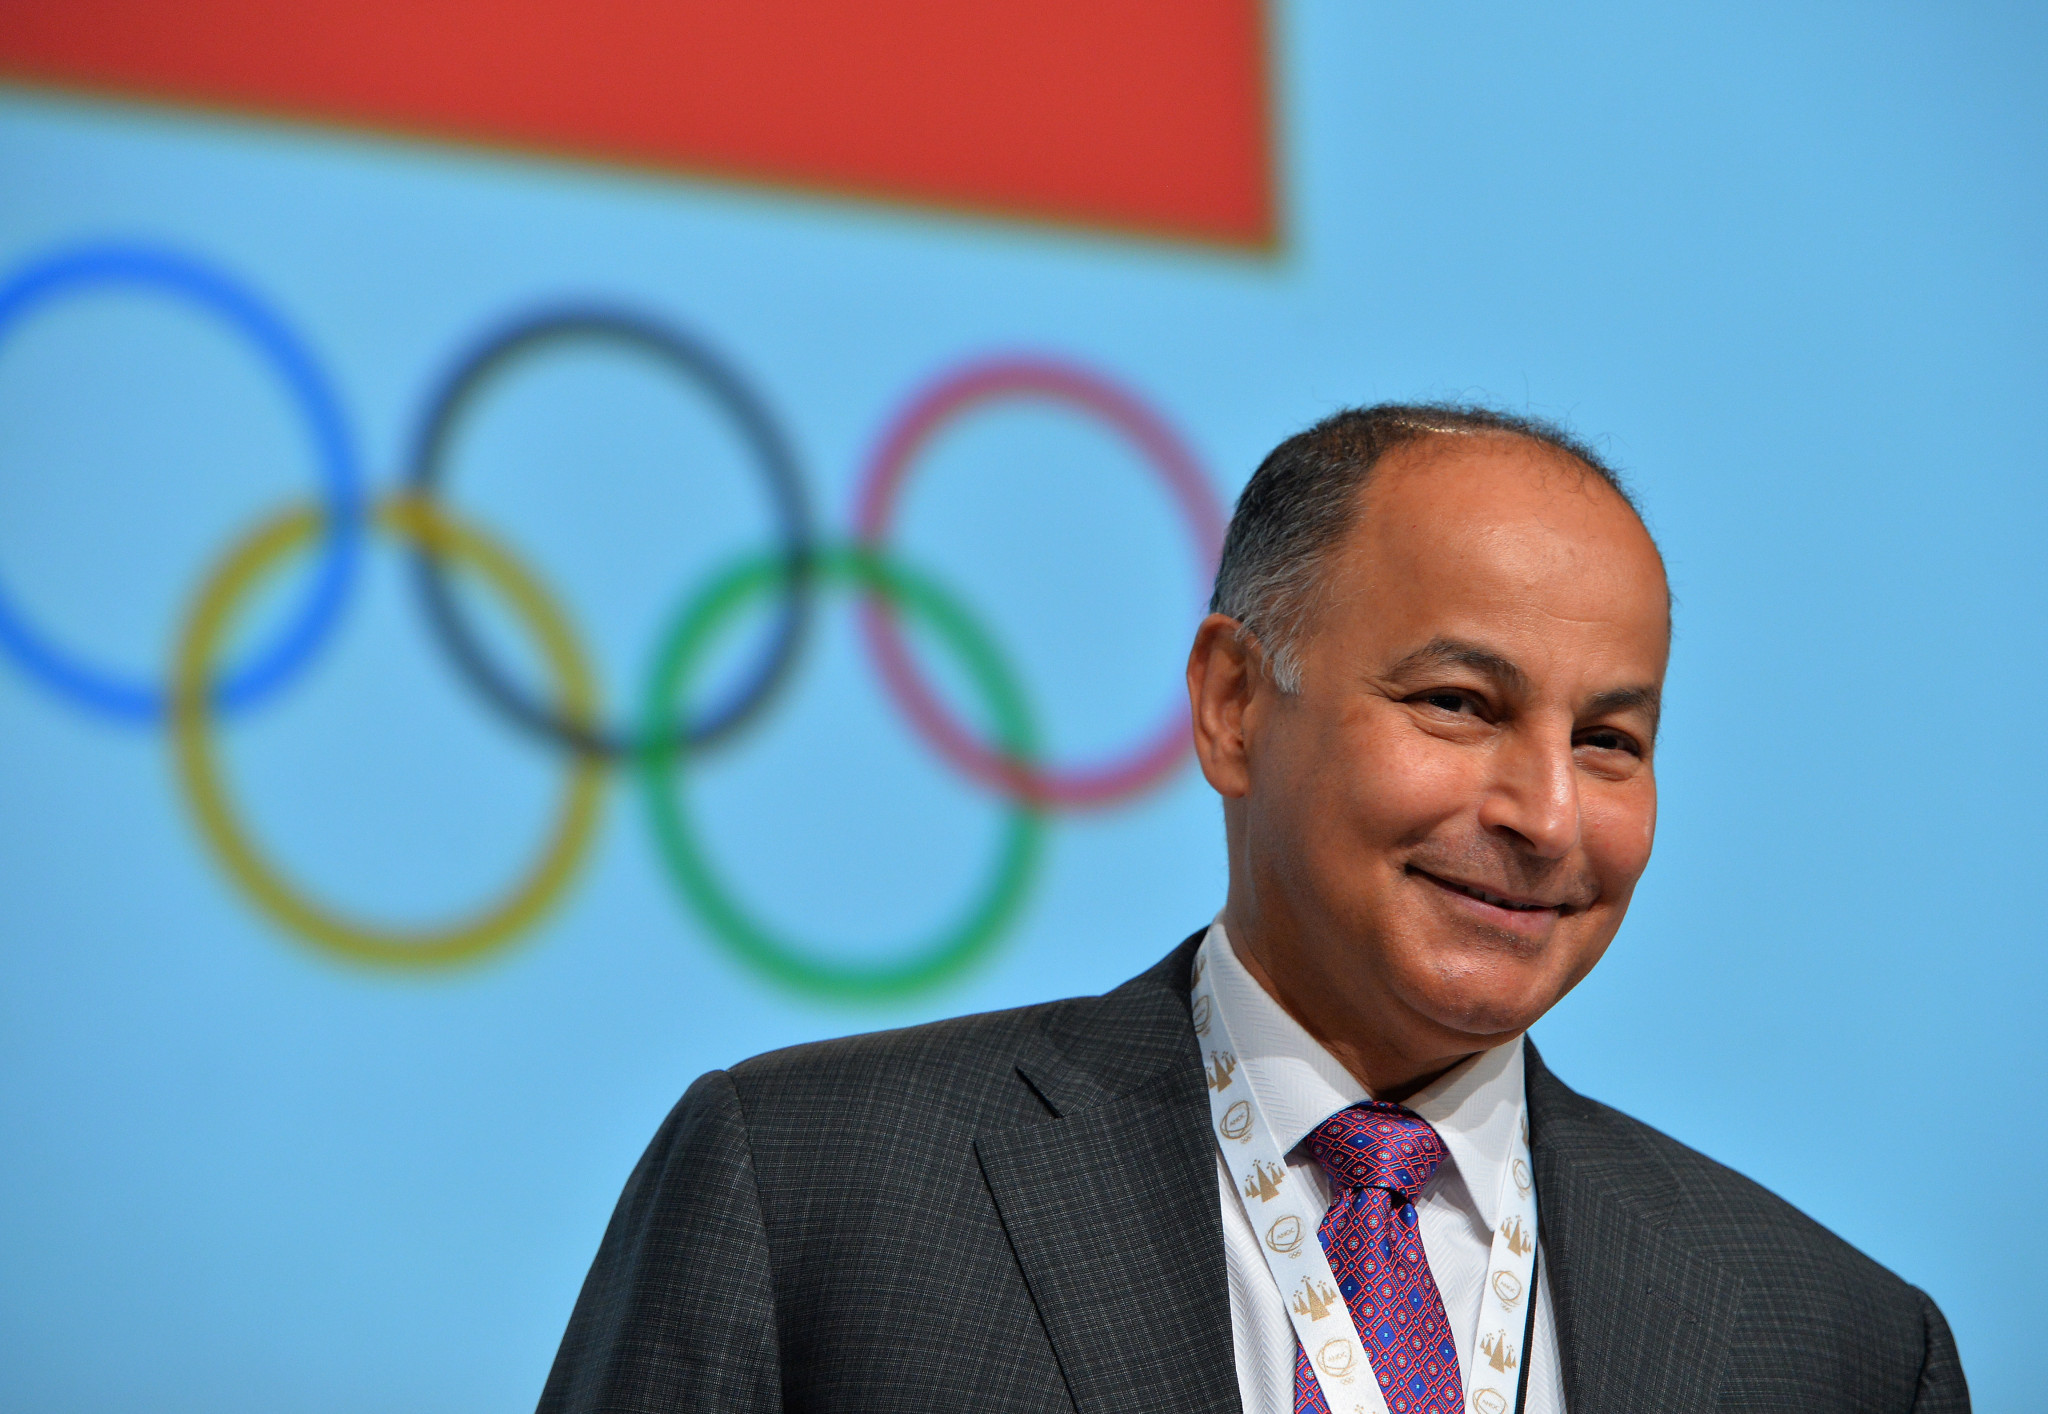 Olympic Council of Asia director general Husain Al-Musallam has said that Kuwait's Government is focused on getting the country's ban lifted in time for Tokyo 2020 ©Getty Images 